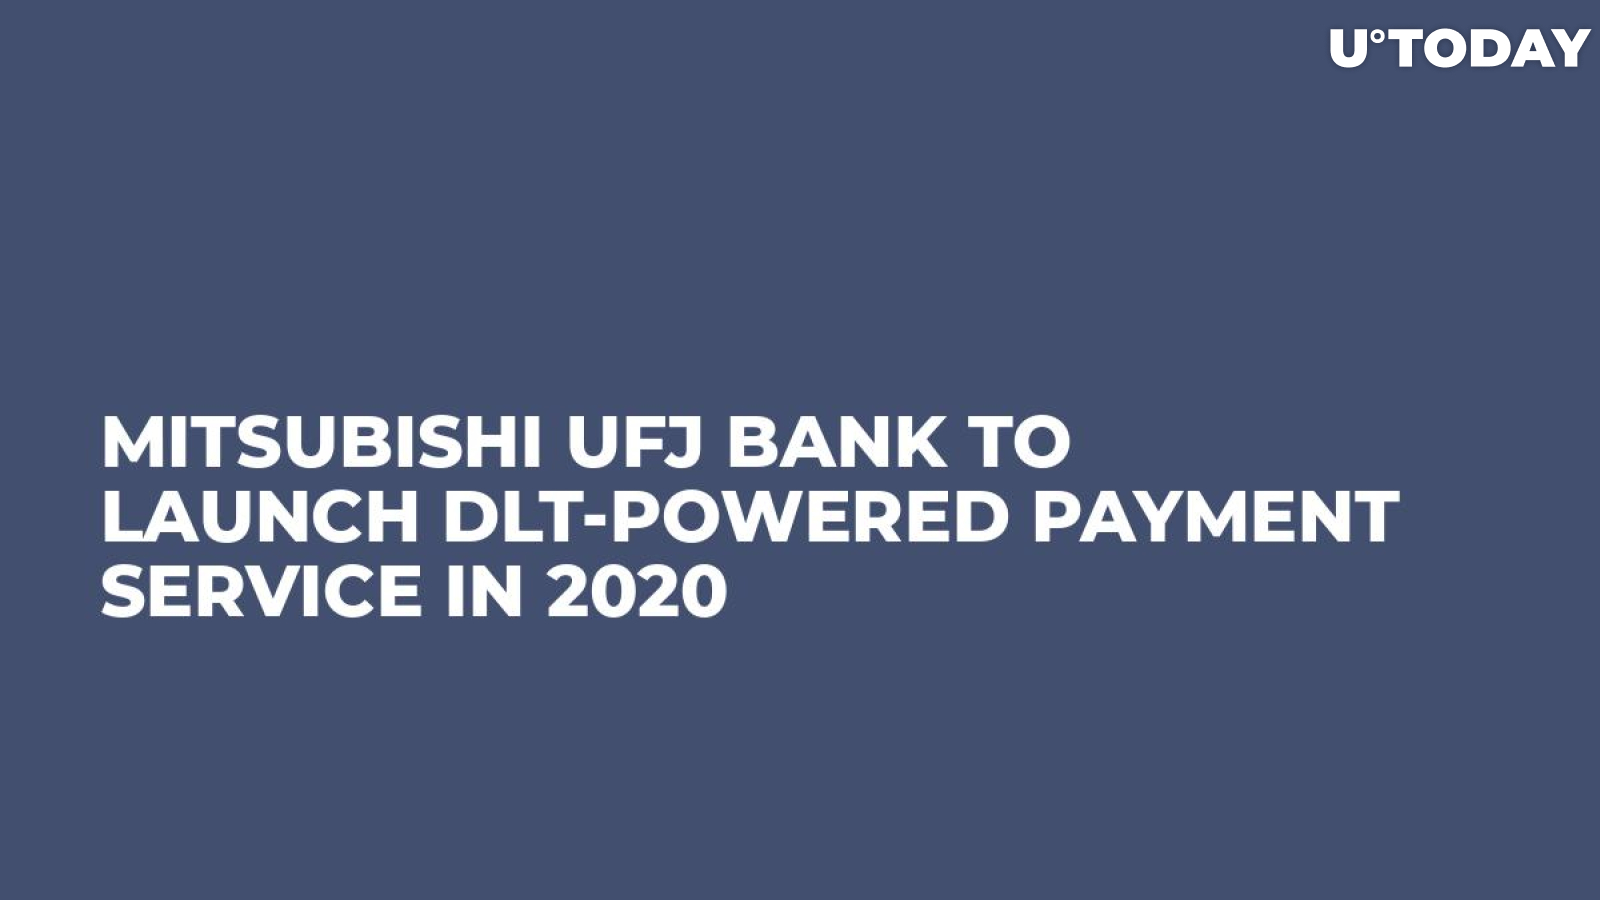 Mitsubishi UFJ Bank to Launch DLT-Powered Payment Service in 2020